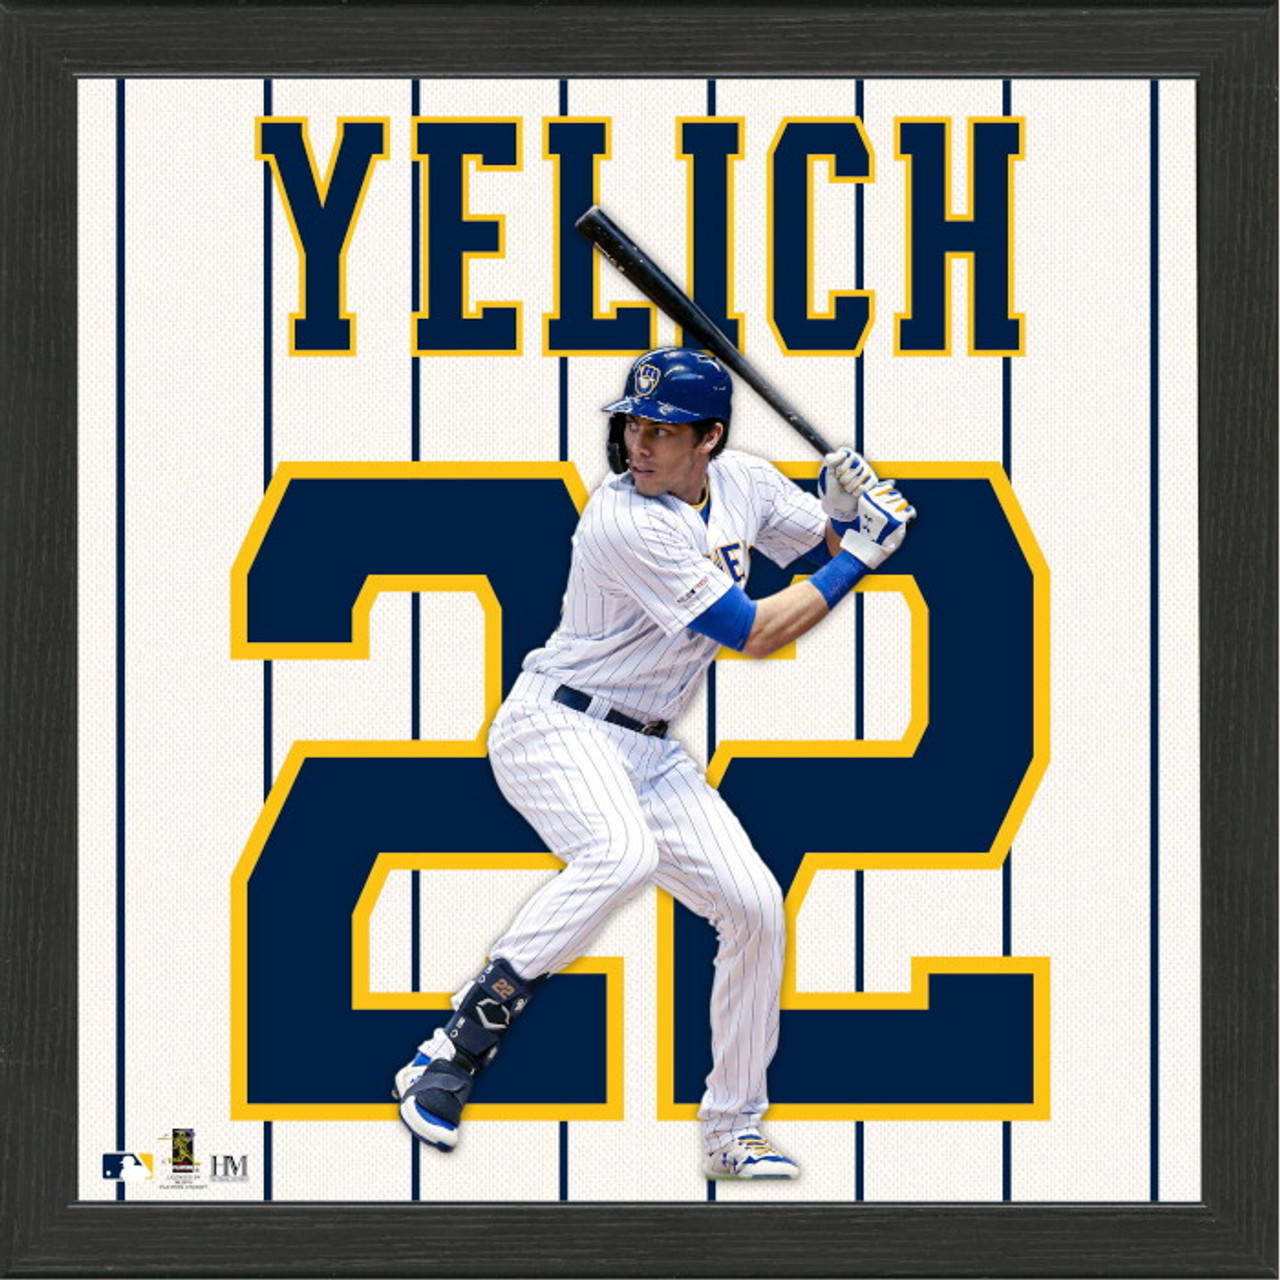 Official Christian Yelich Jersey, Christian Yelich Shirts, Baseball  Apparel, Christian Yelich Gear